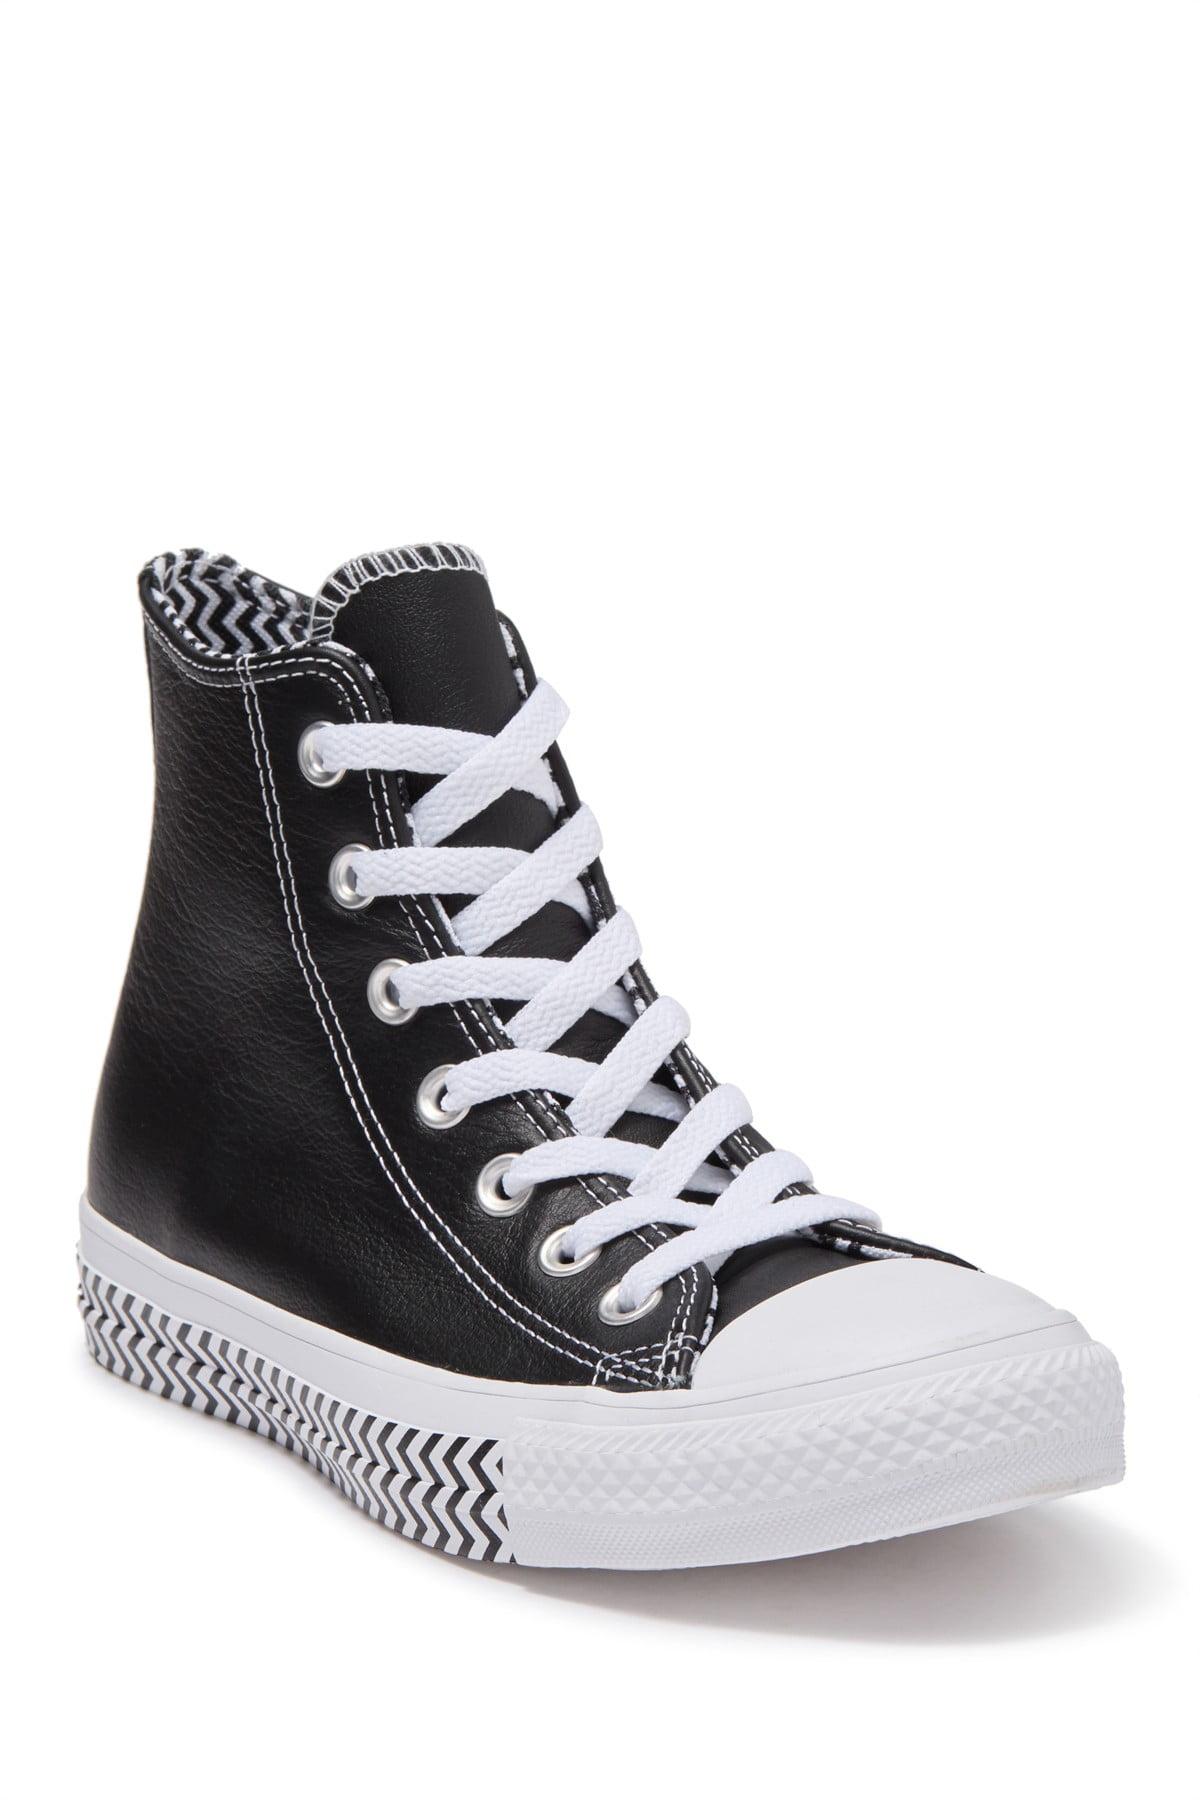 Converse Leather Chuck Taylor All Star 564943c Hi-top Trainers in  Black/White (Black) | Lyst